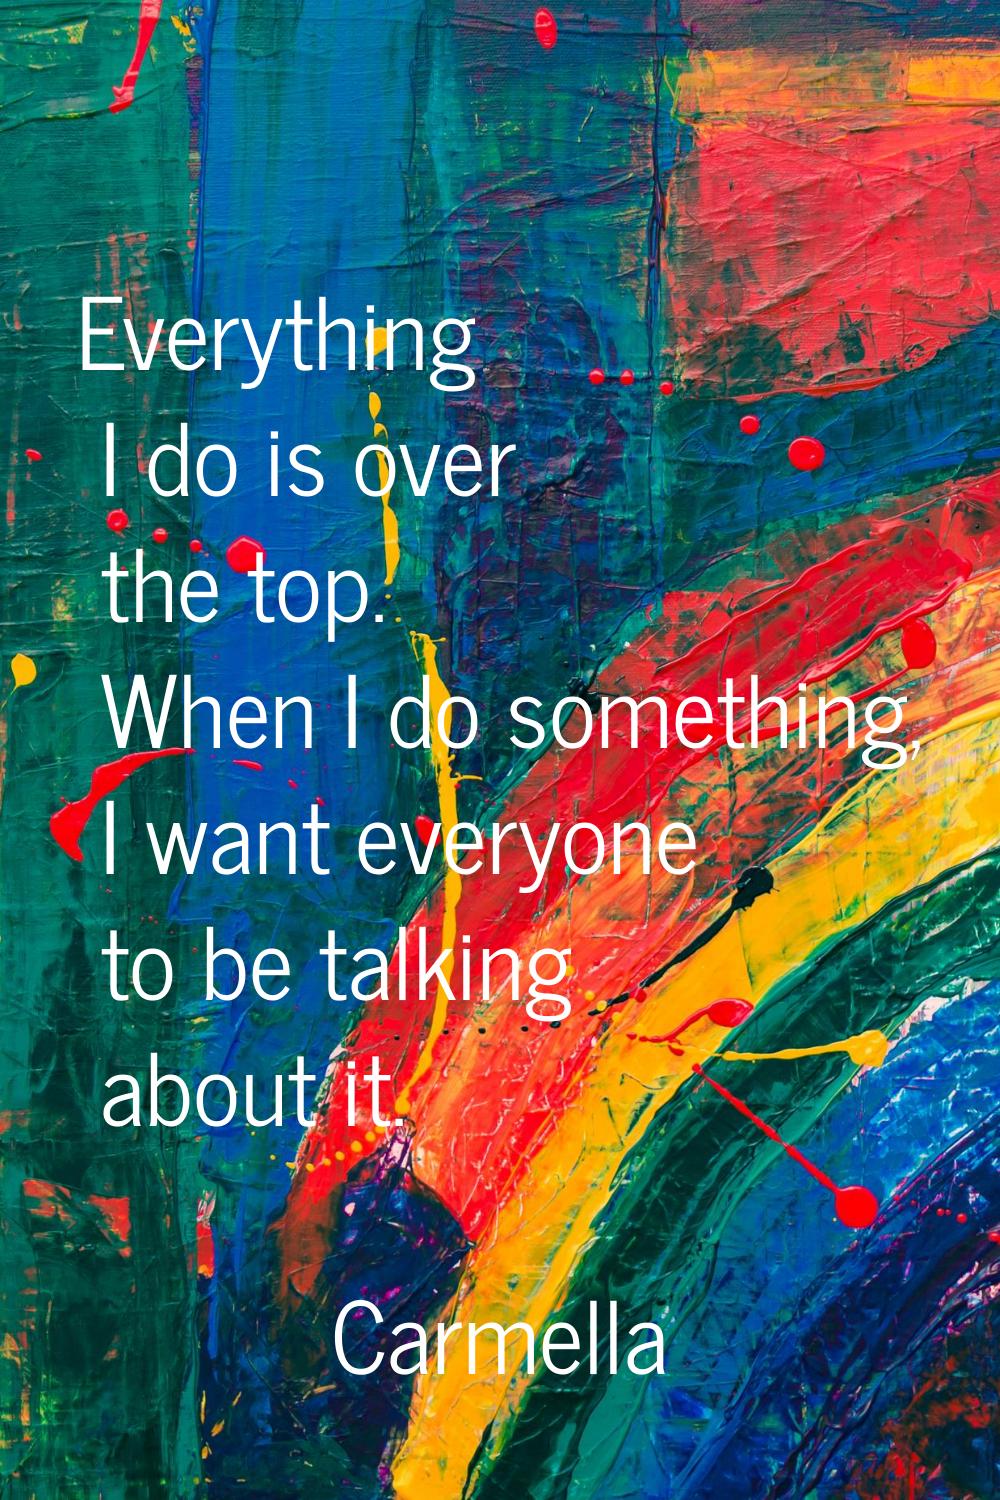 Everything I do is over the top. When I do something, I want everyone to be talking about it.